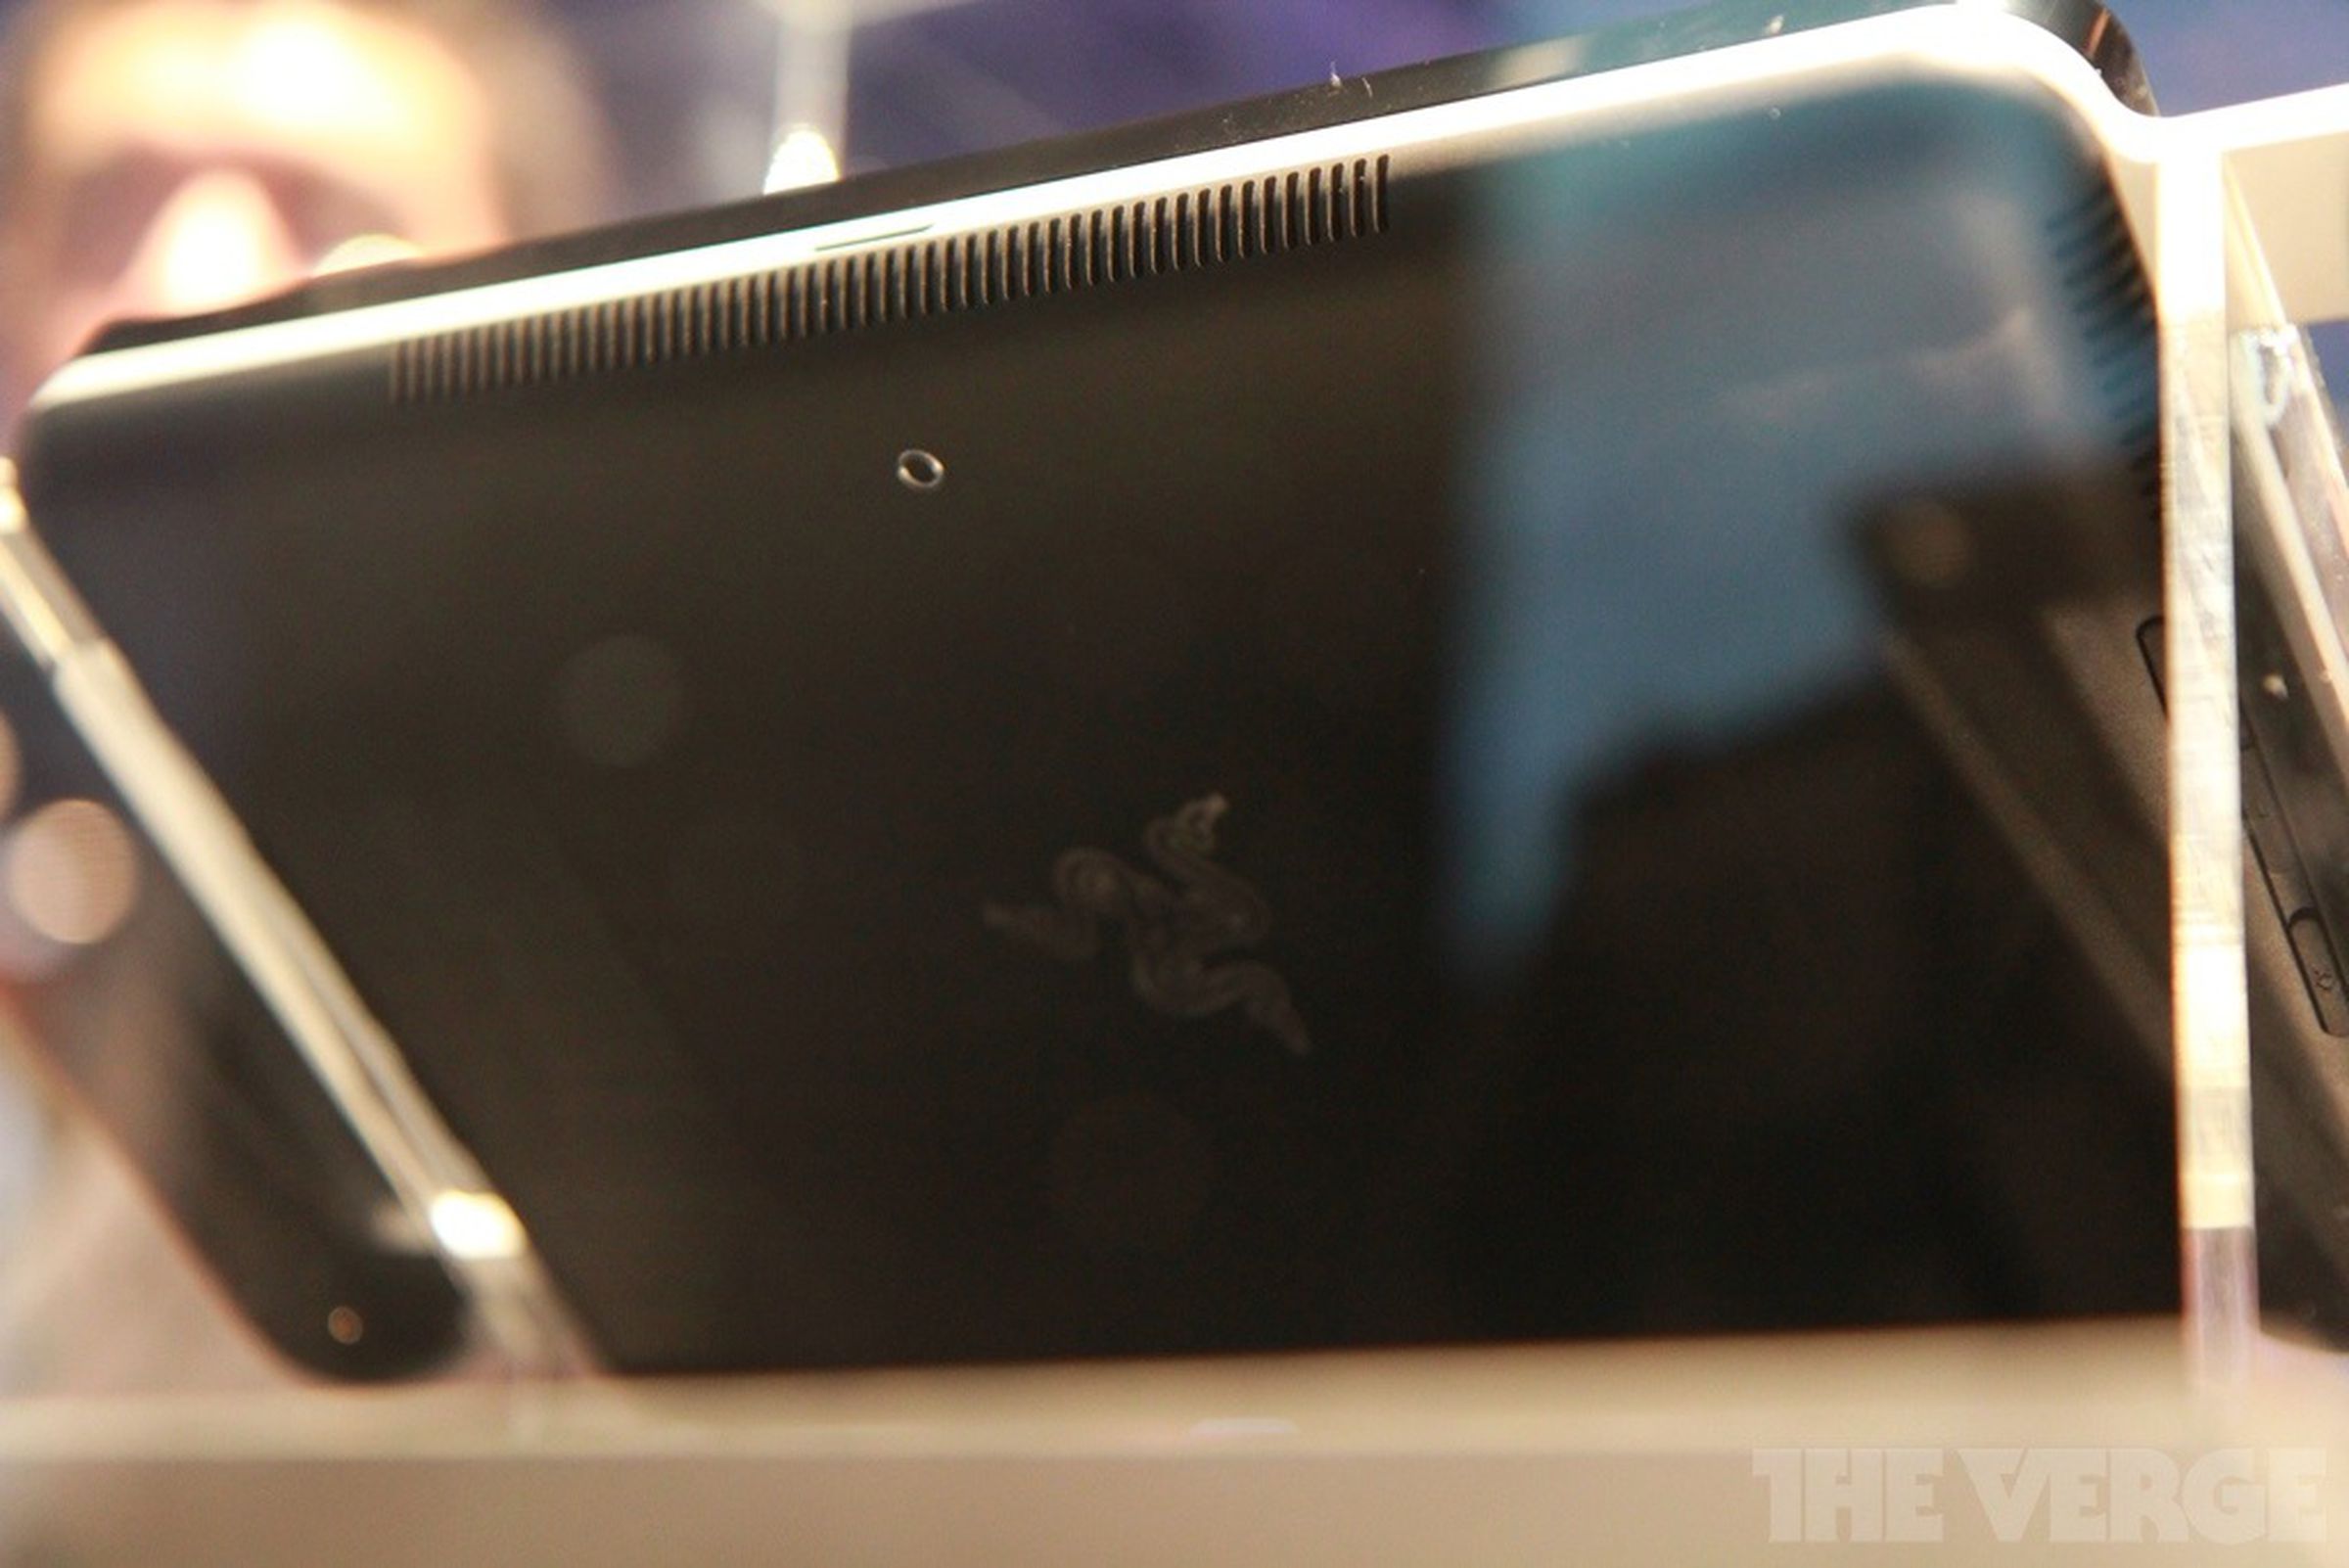 Razer Project Fiona tablet first eyes-on pictures